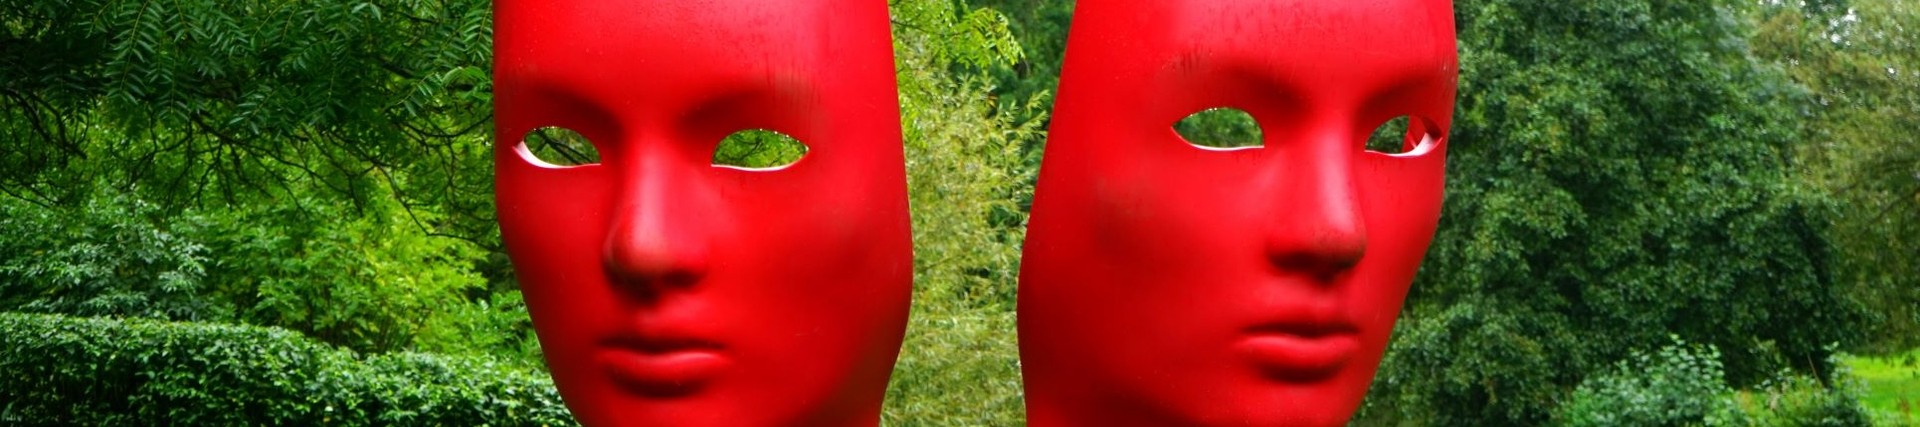 Sculpture of two red faces in a park